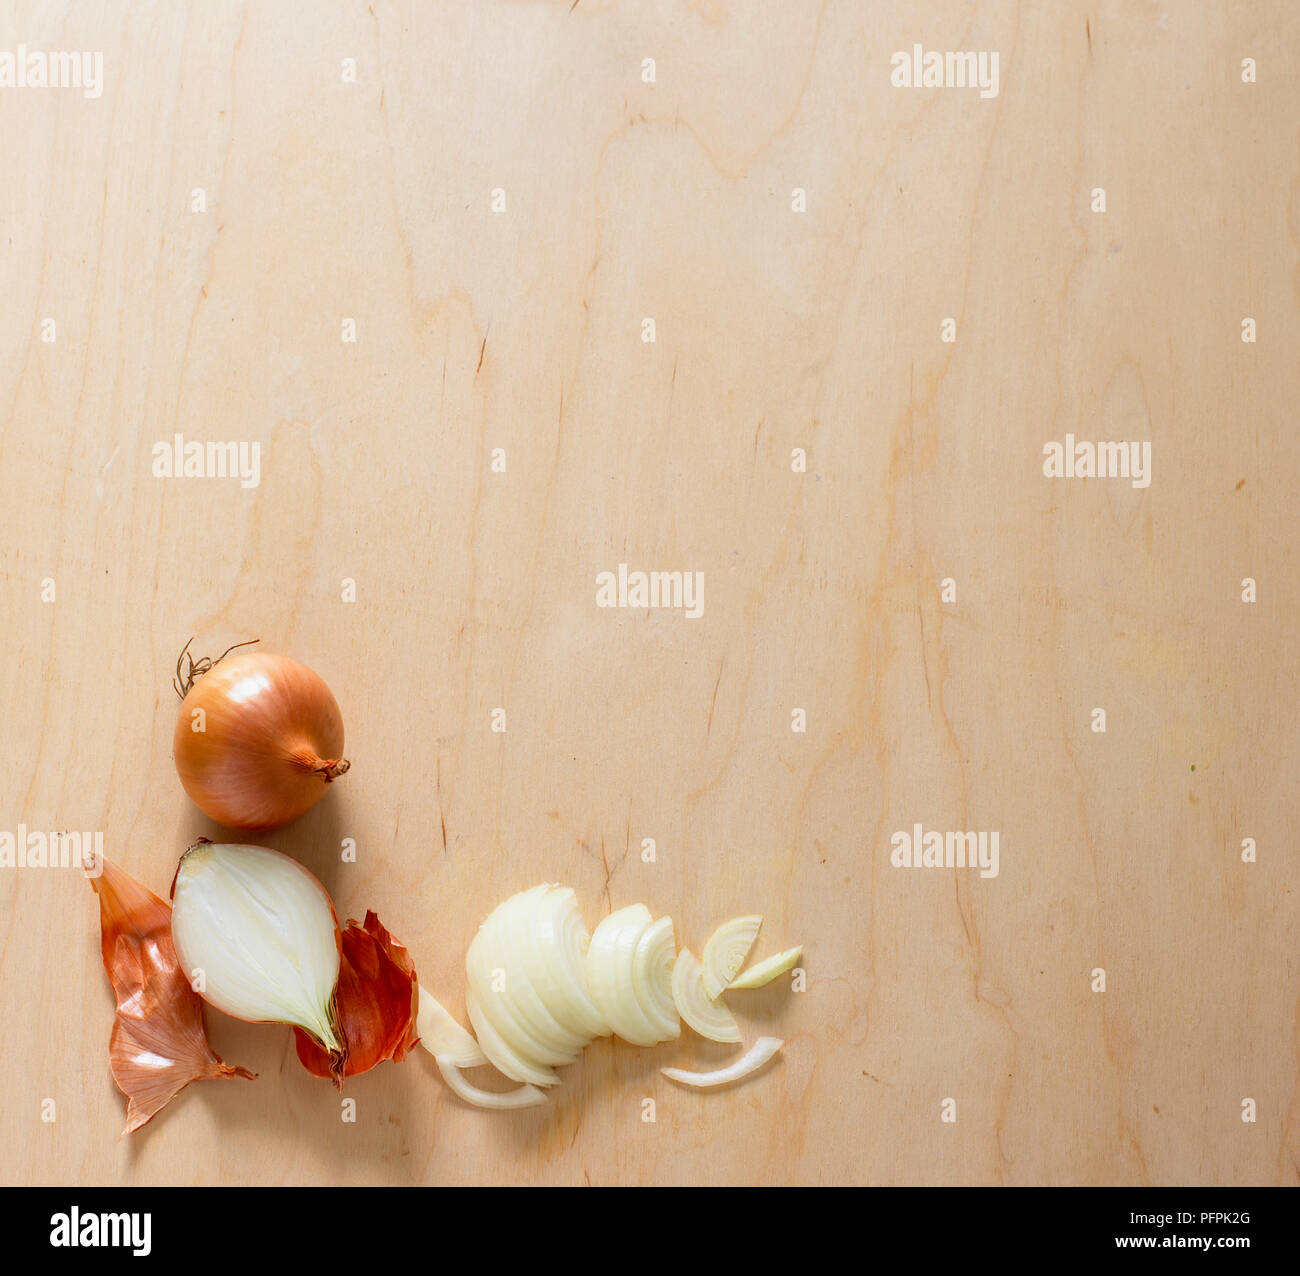 Whole, halved, peeled and sliced onions on wooden surface Stock Photo